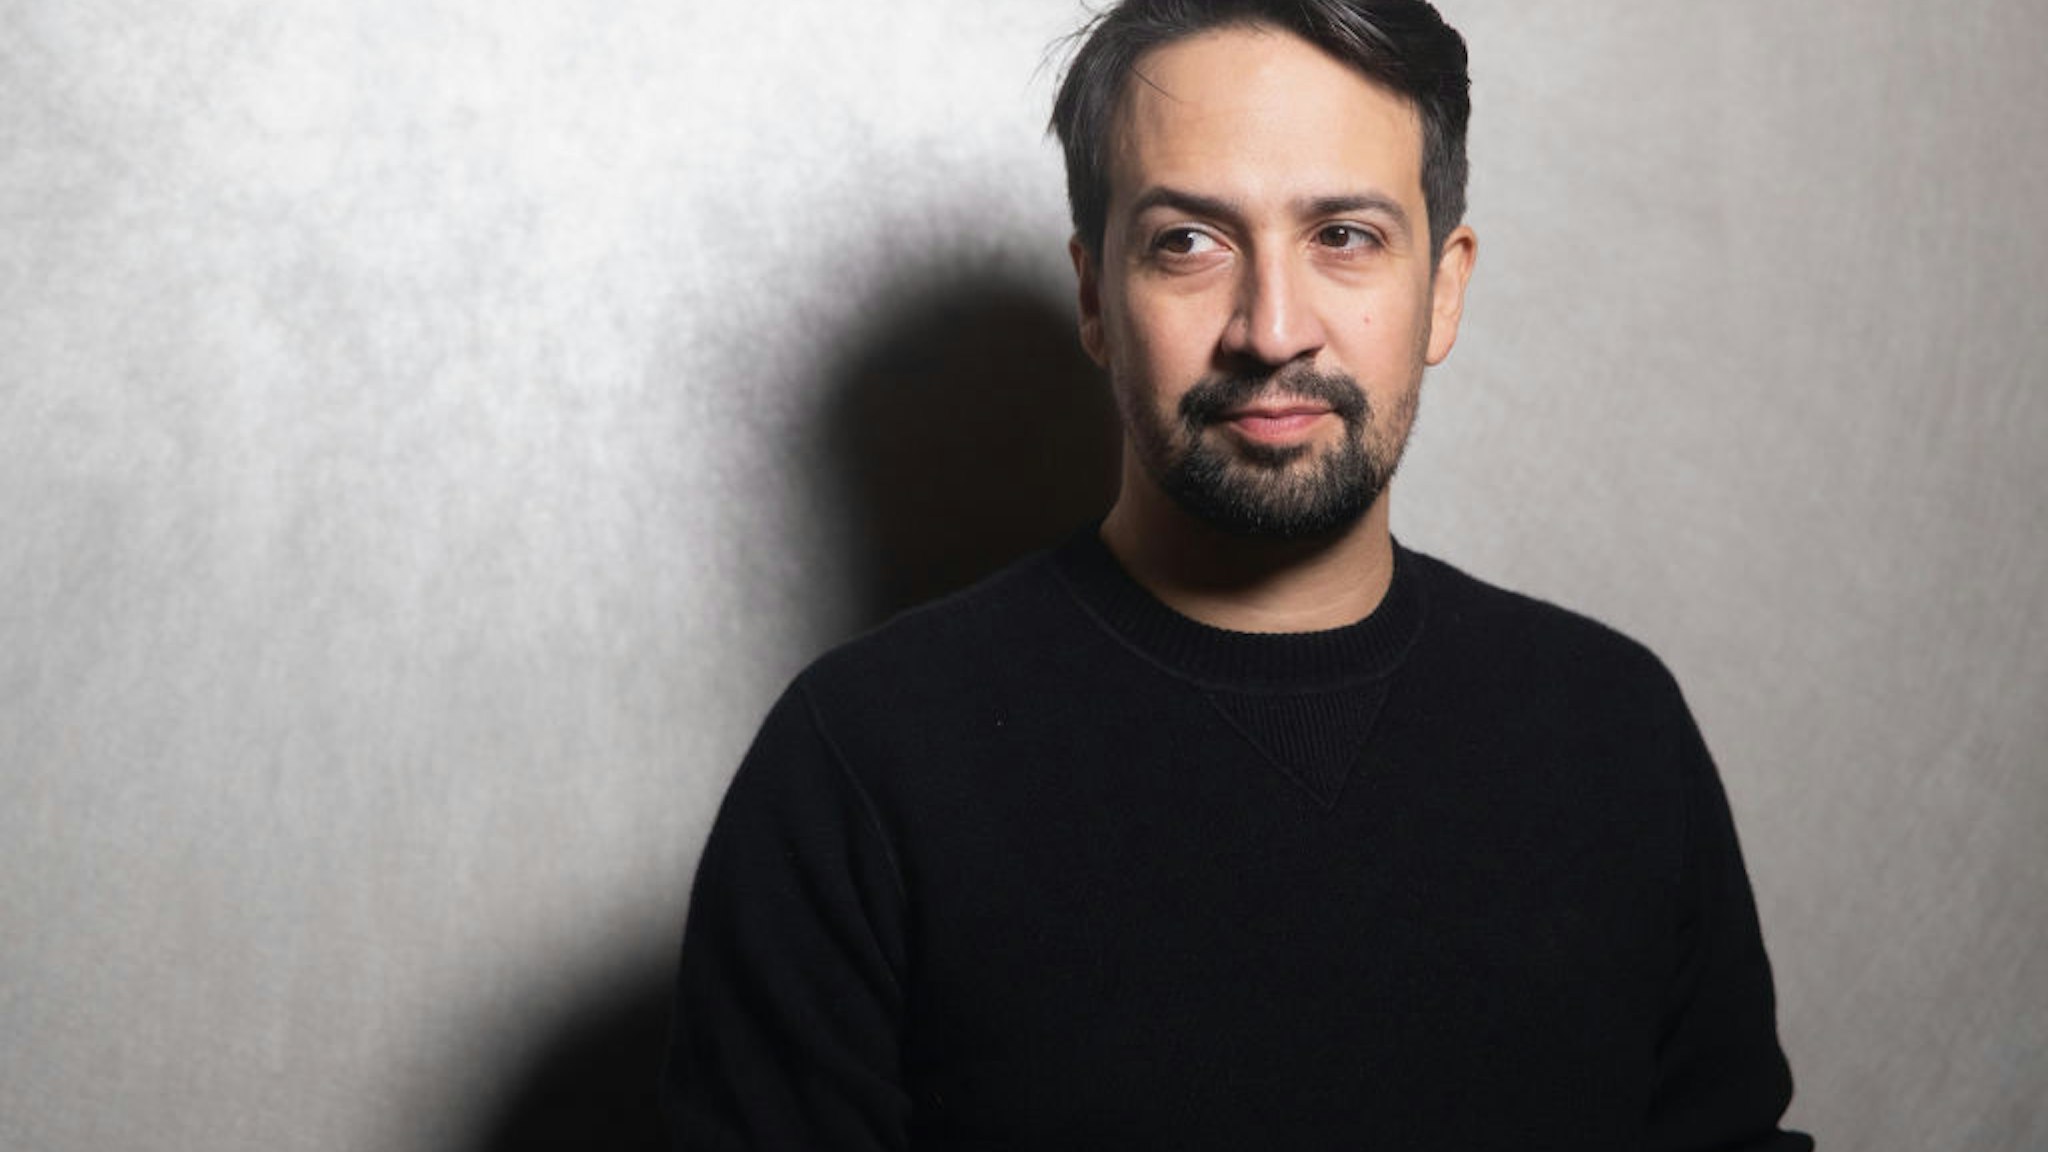 PARK CITY, UT - JANUARY 25: Lin-Manuel Miranda attends the official after party for "Siempre, Luis" at The Latinx House on January 25, 2020 in Park City, Utah. (Photo by Mat Hayward/Getty Images for The Latinx House)